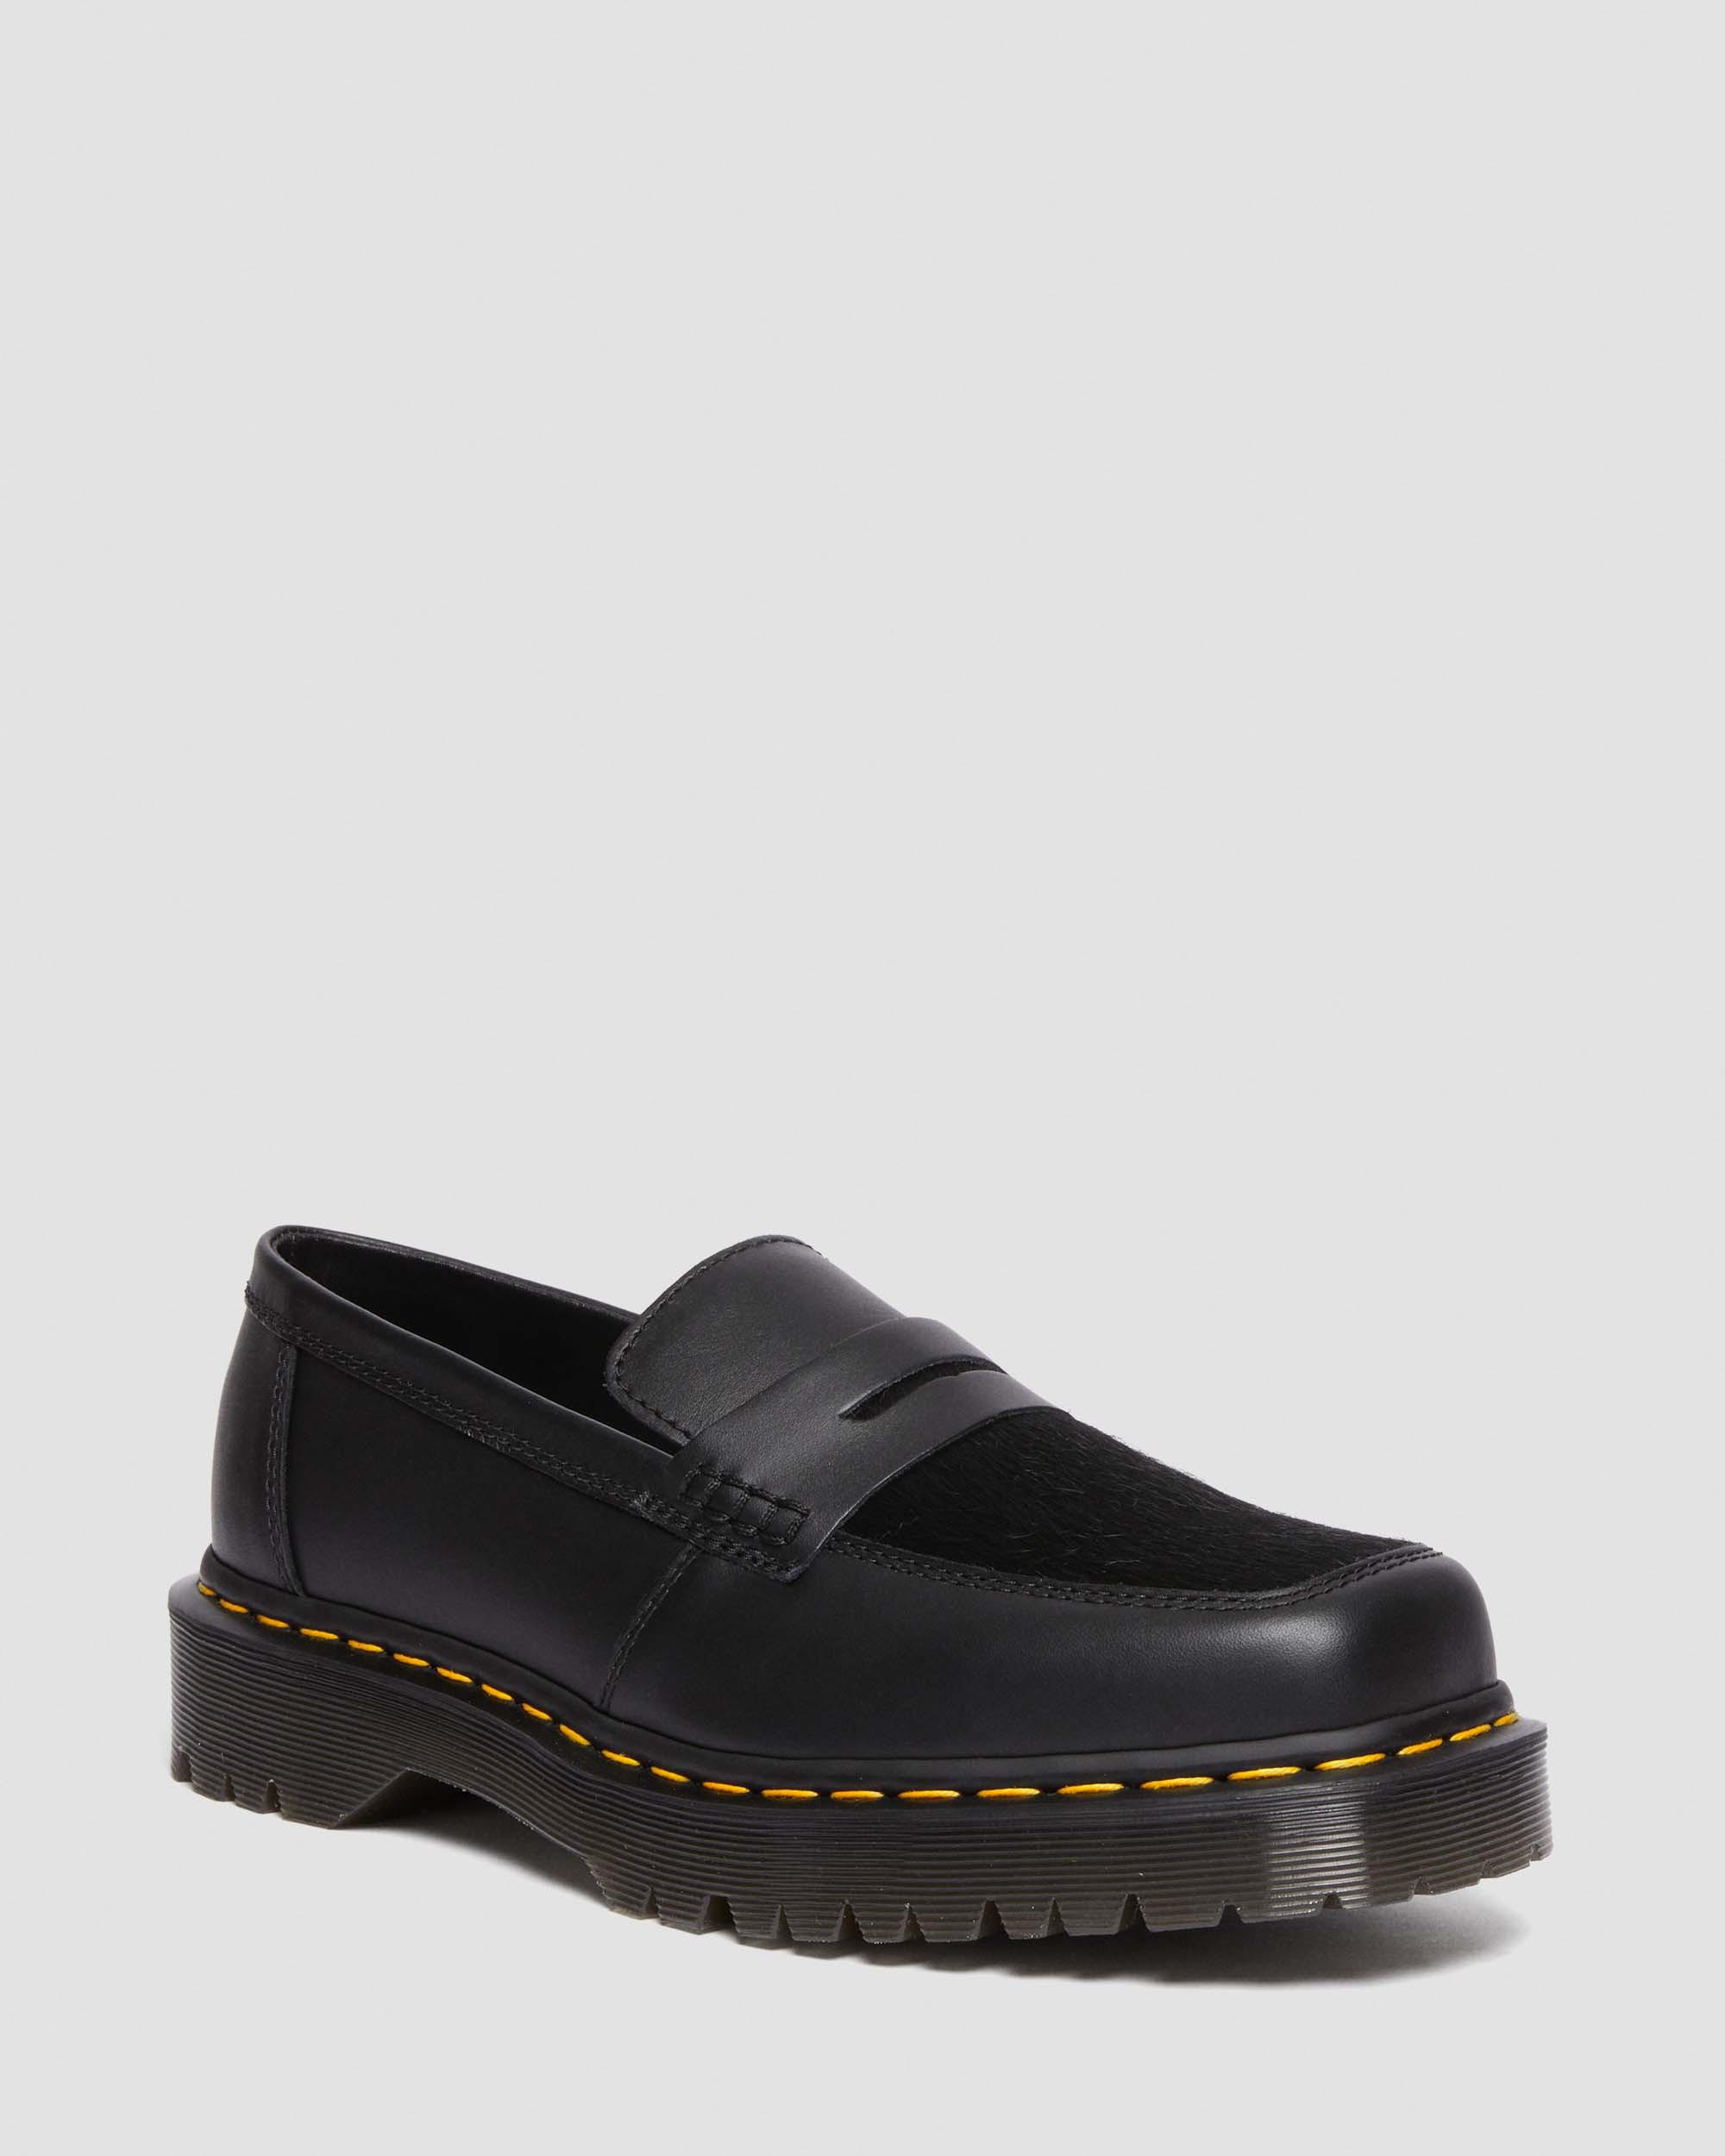 Penton Bex Square Toe Hair-On & Leather Loafers in Black | Dr. Martens